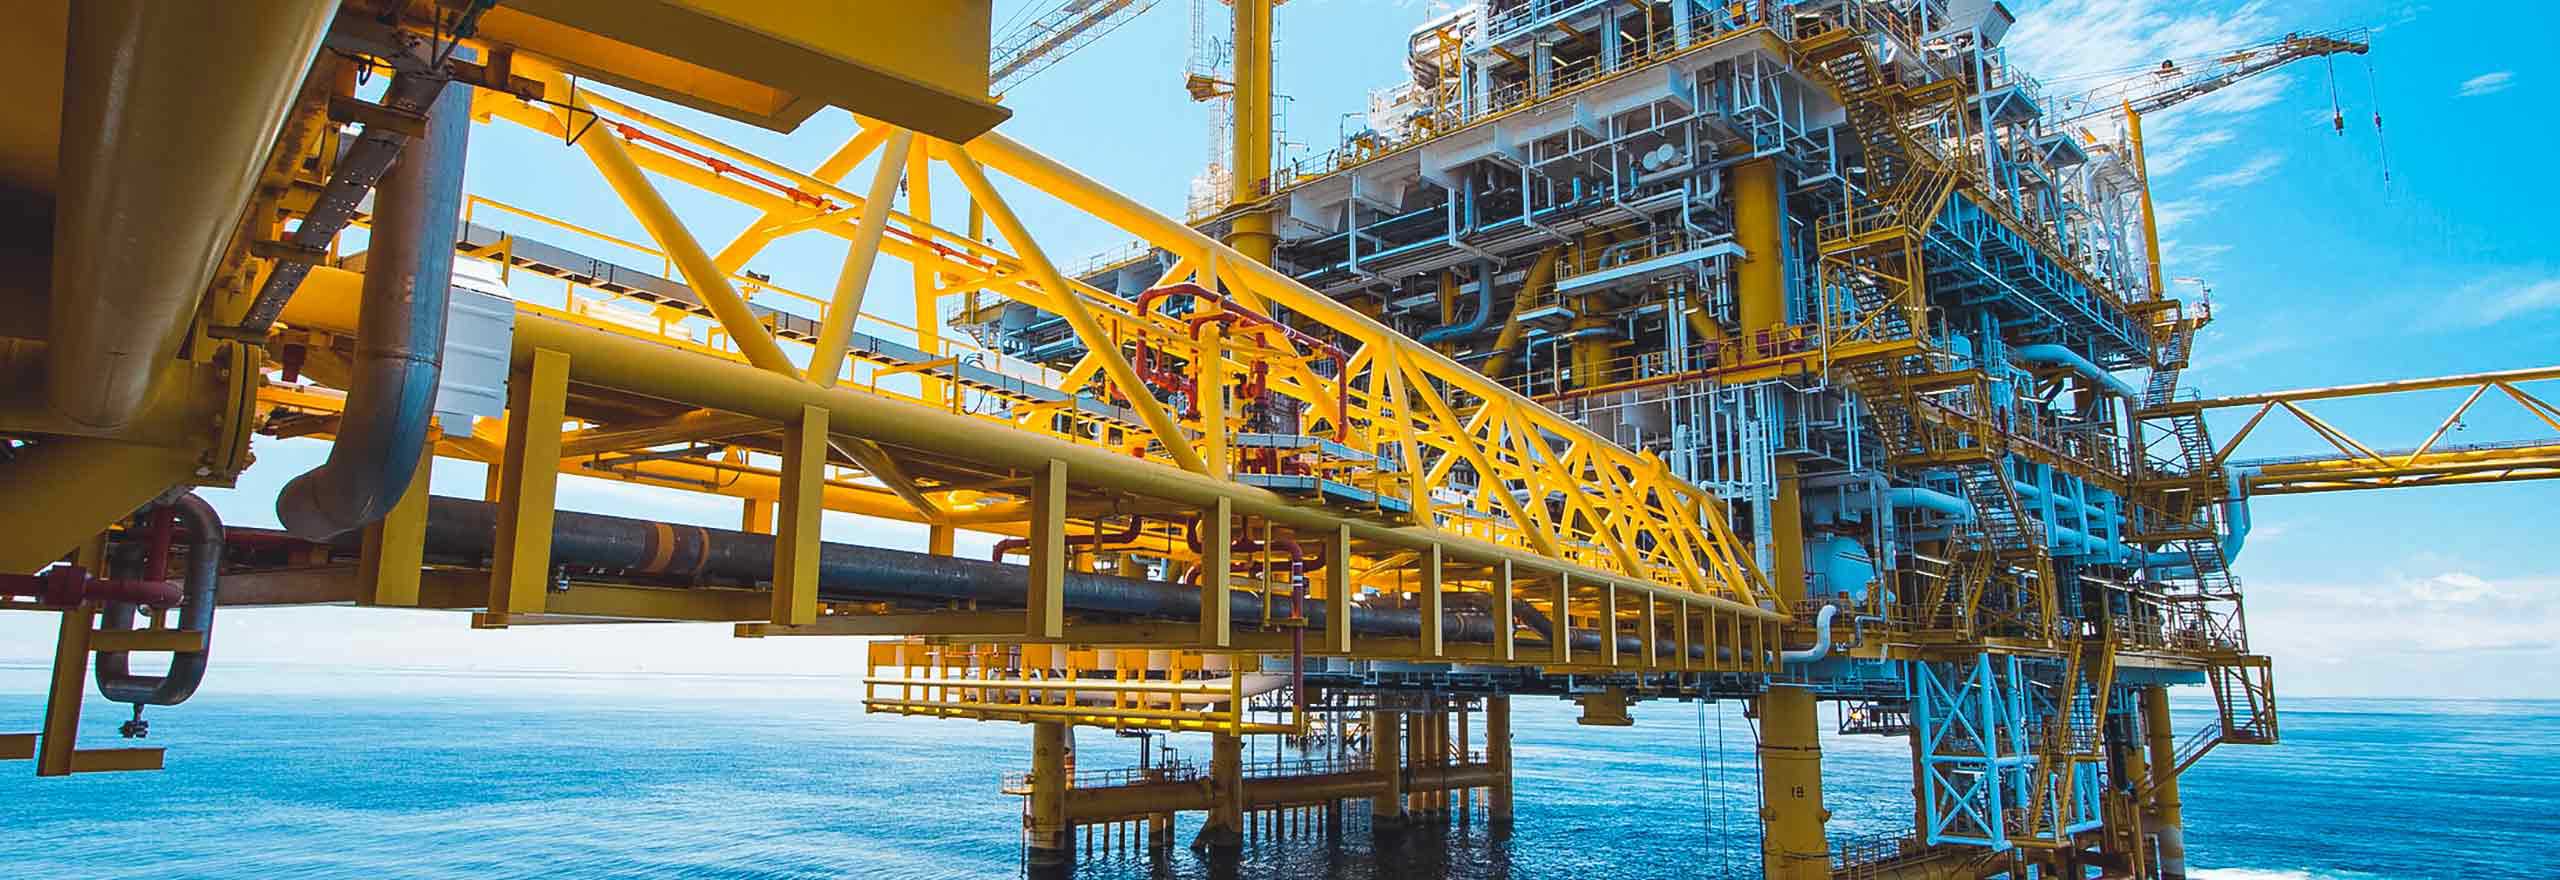 Offshore rig using Hexagon’s oil and gas solutions